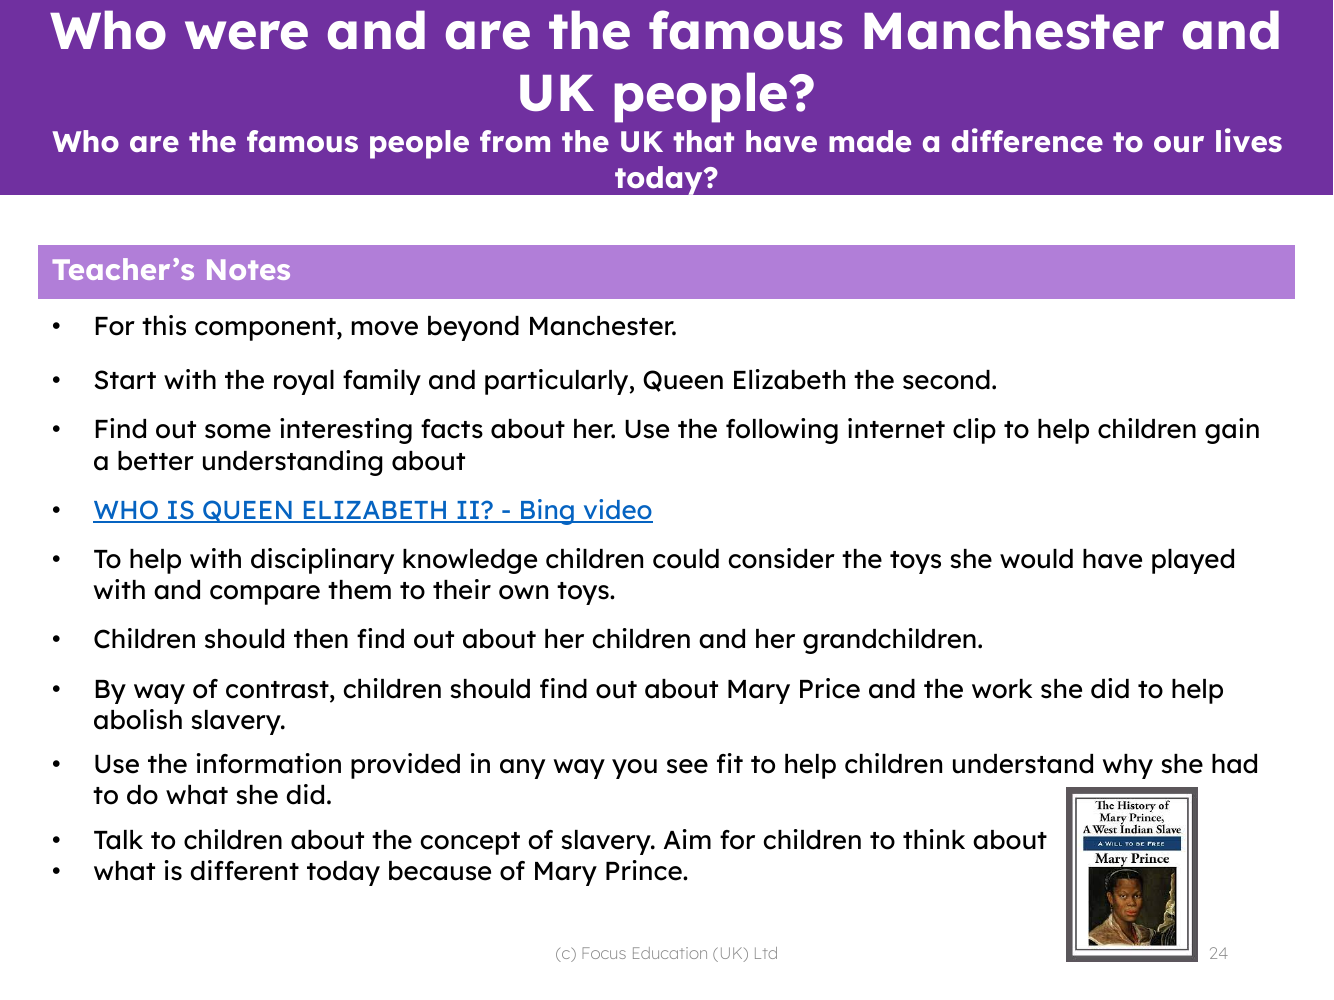 Who are the famous people from the UK that have made a difference to our lives today? - Teacher notes